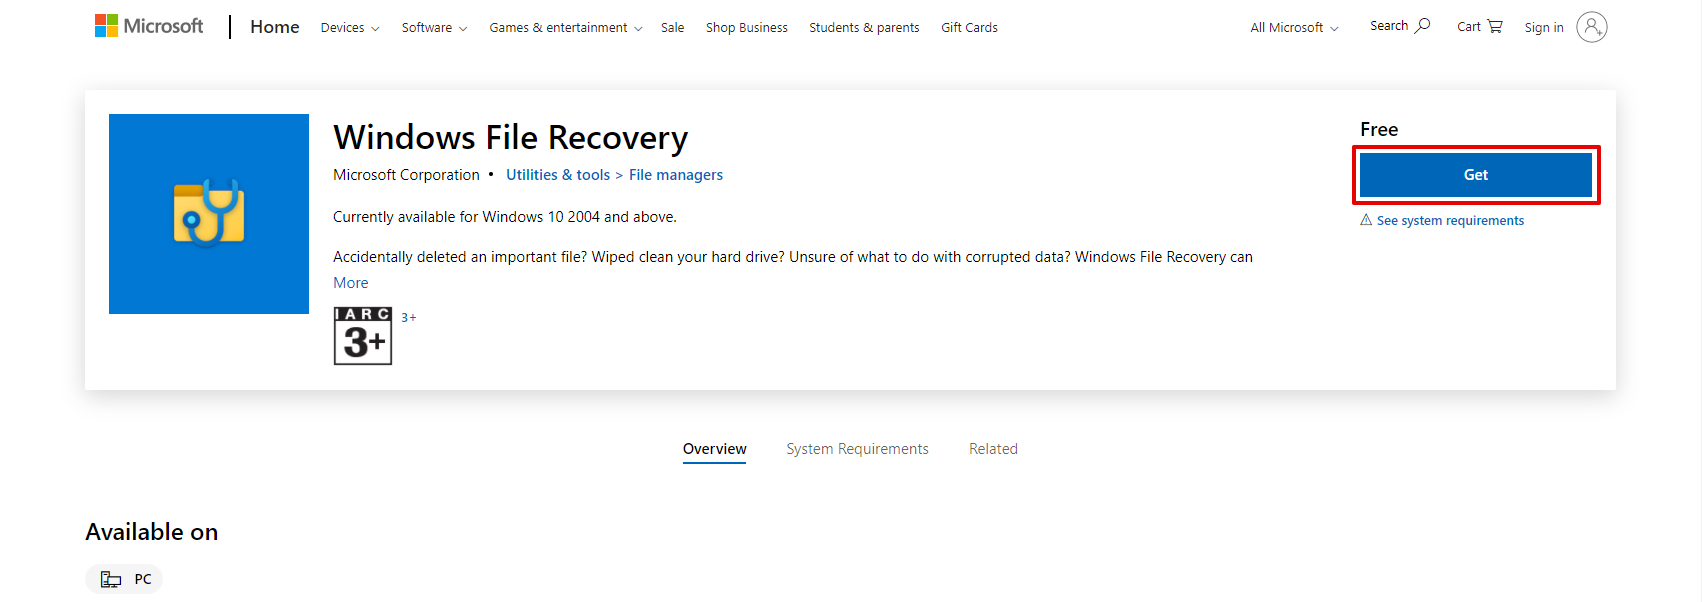 Downloading Windows File Recovery from the Microsoft Store.